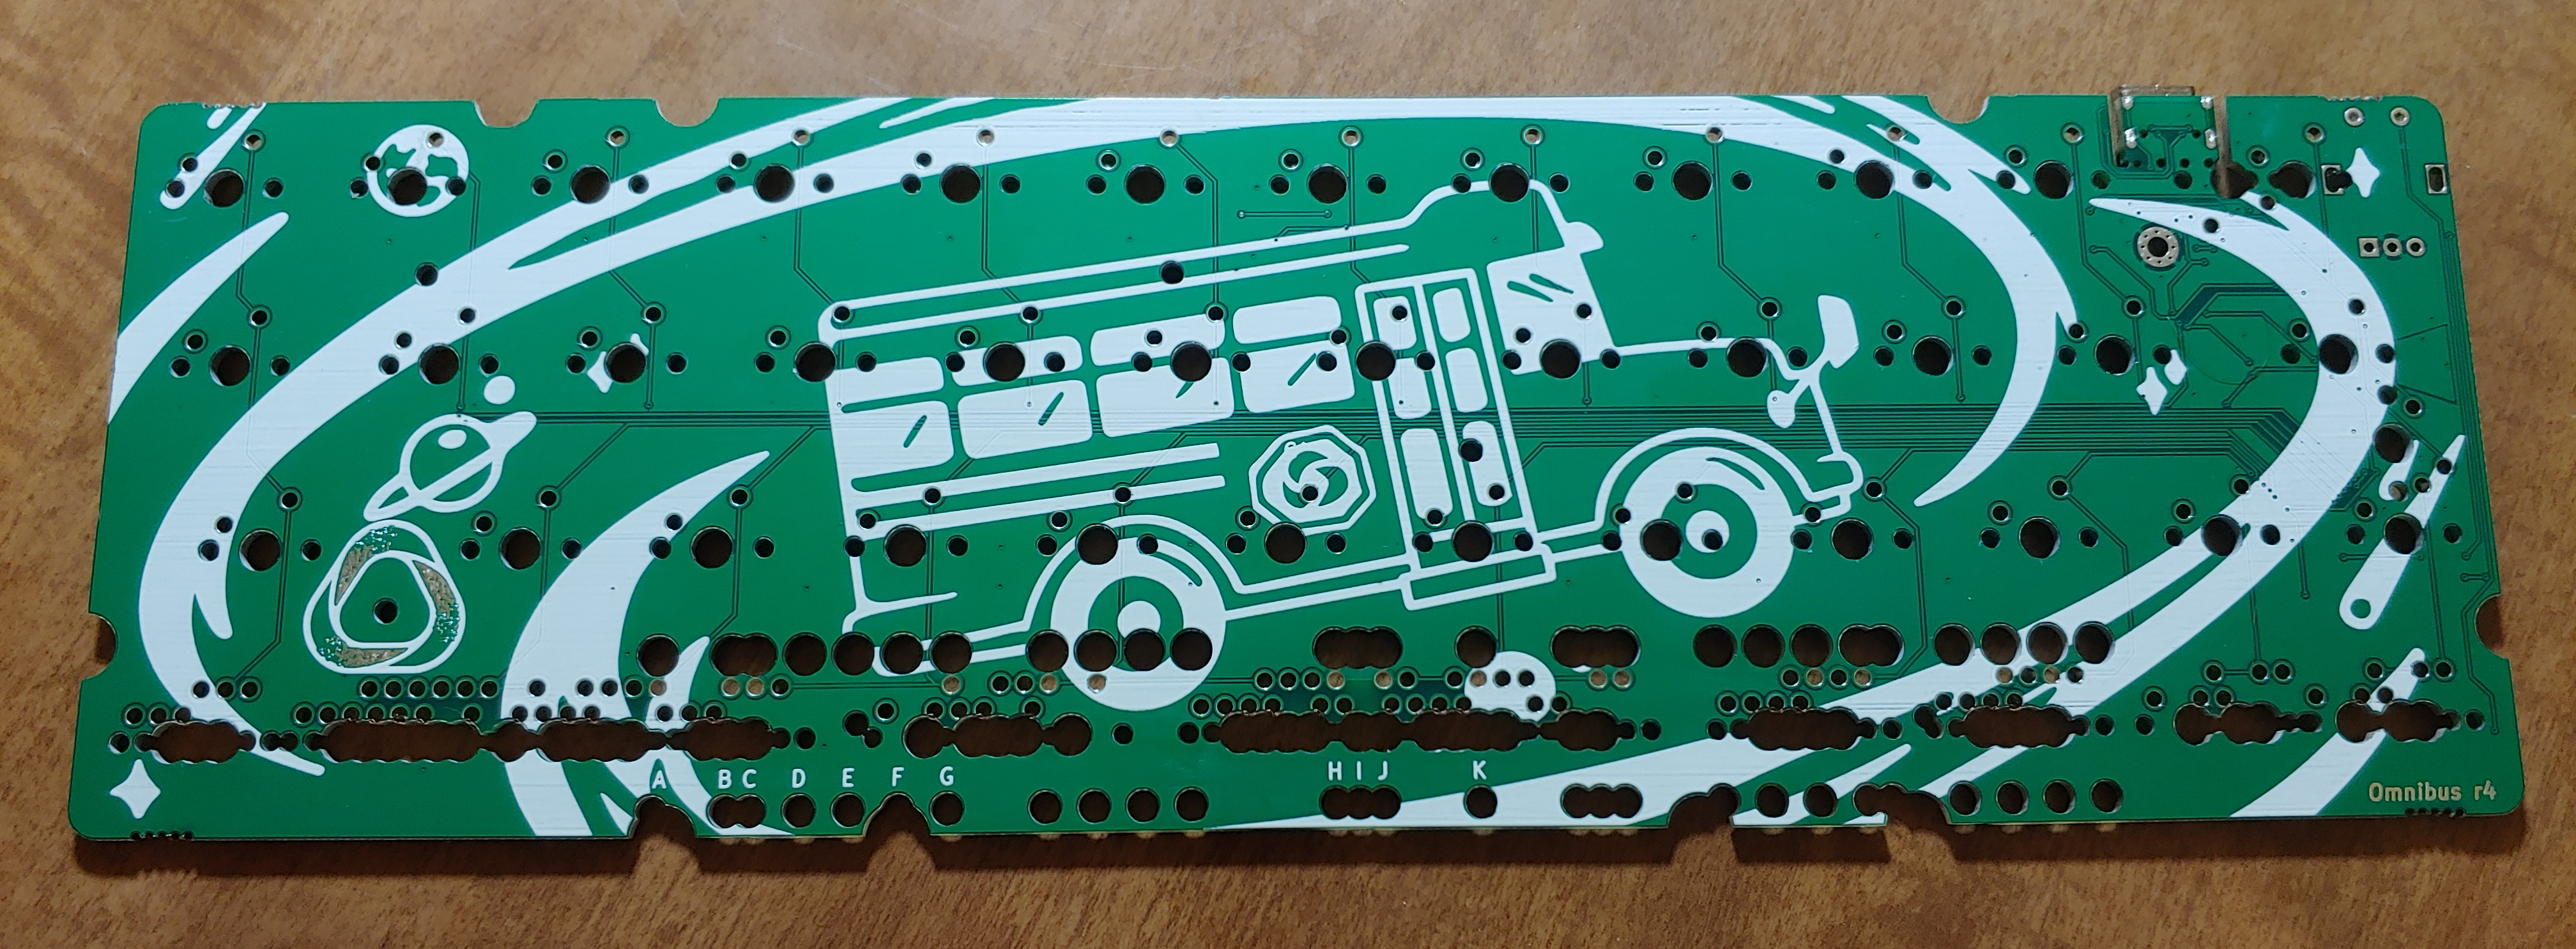 Front of a prototype Omnibus r4 PCB with the mounting tabs removed